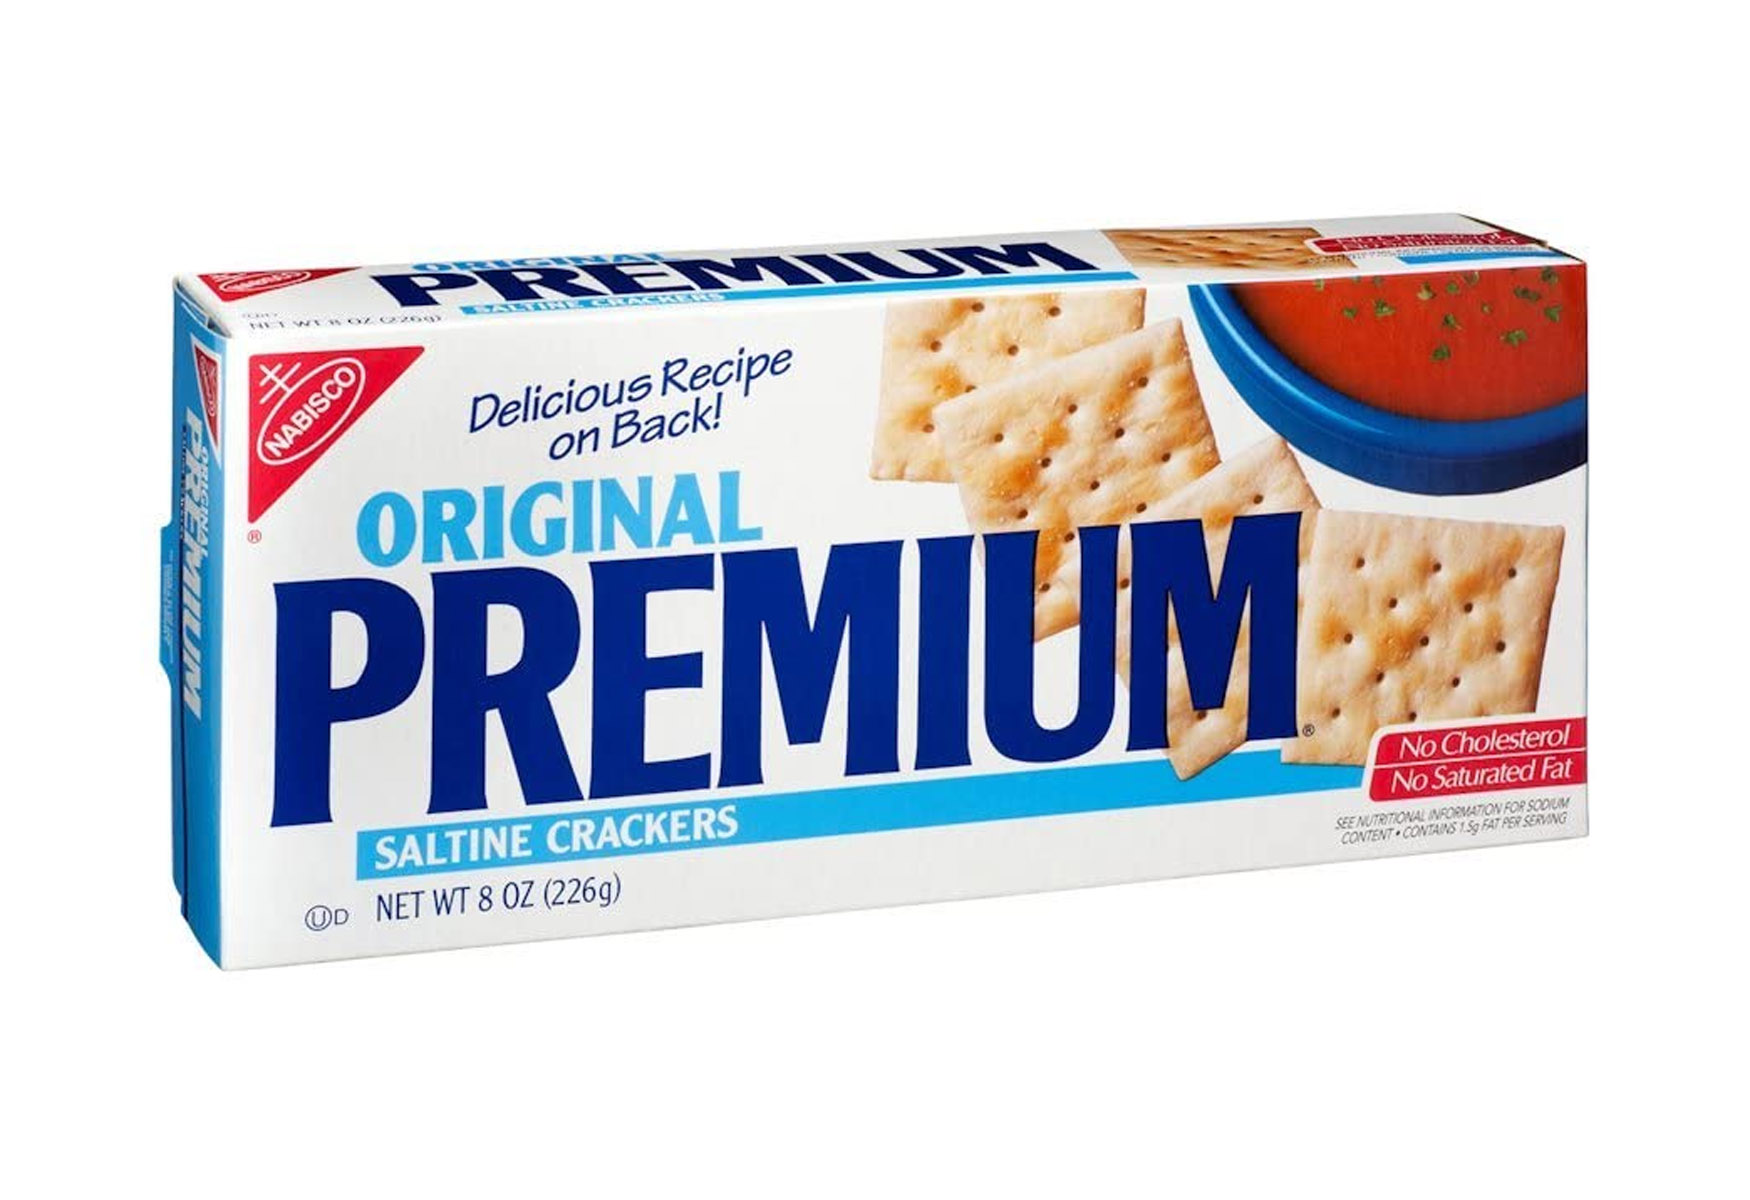 19-nabisco-saltine-crackers-nutrition-facts